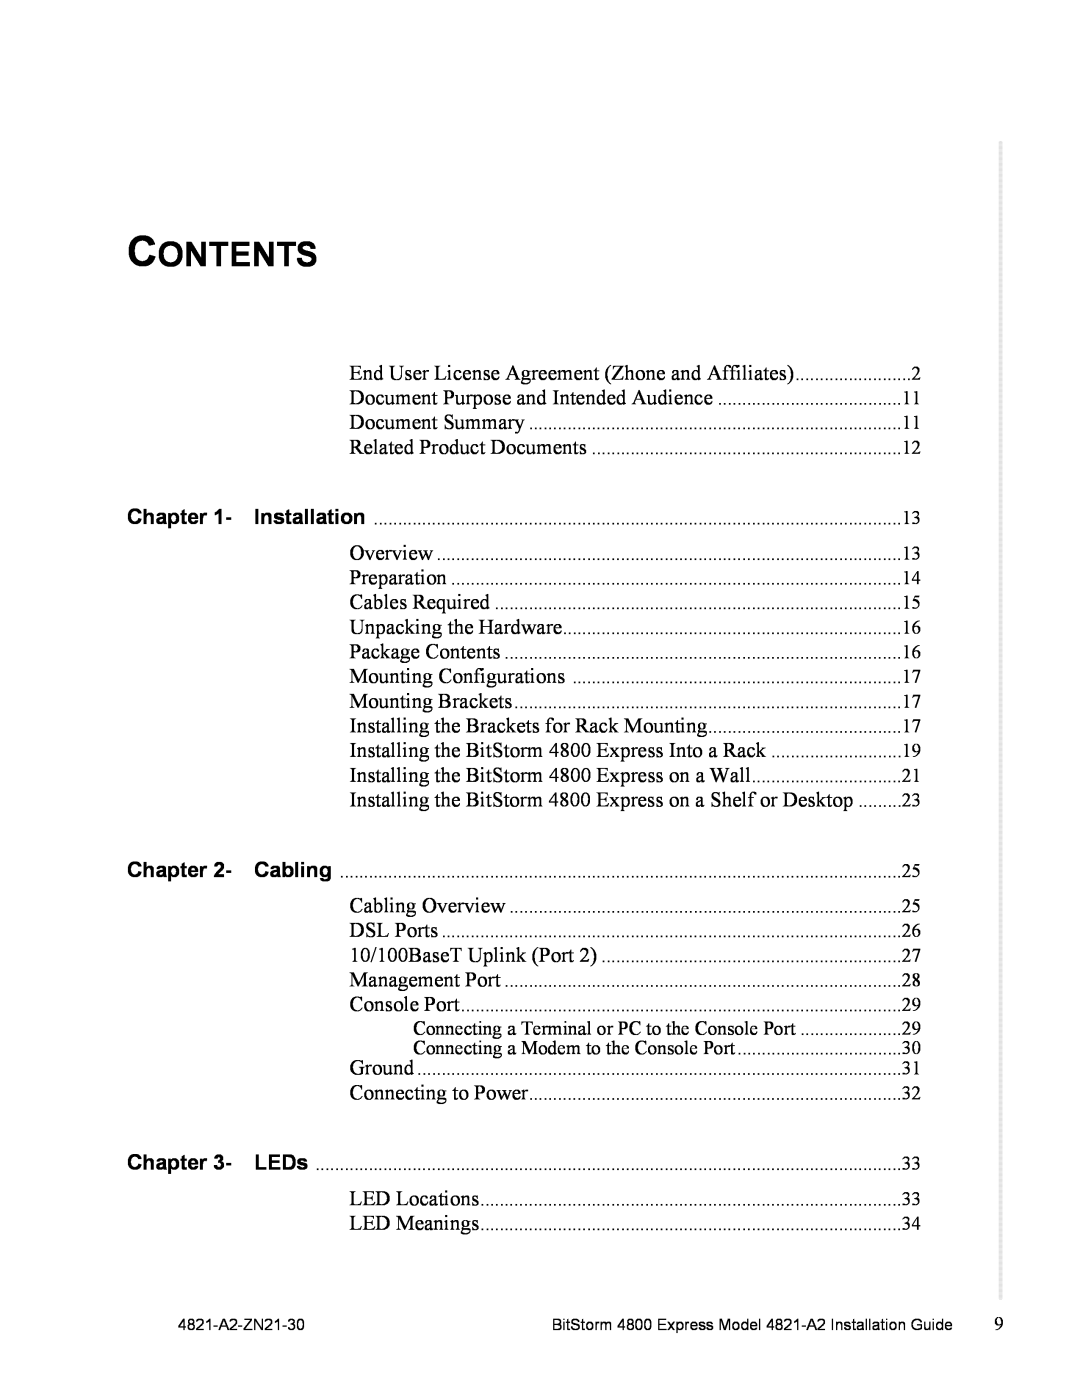 Zhone Technologies 4821-A2 manual Contents, Chapter 